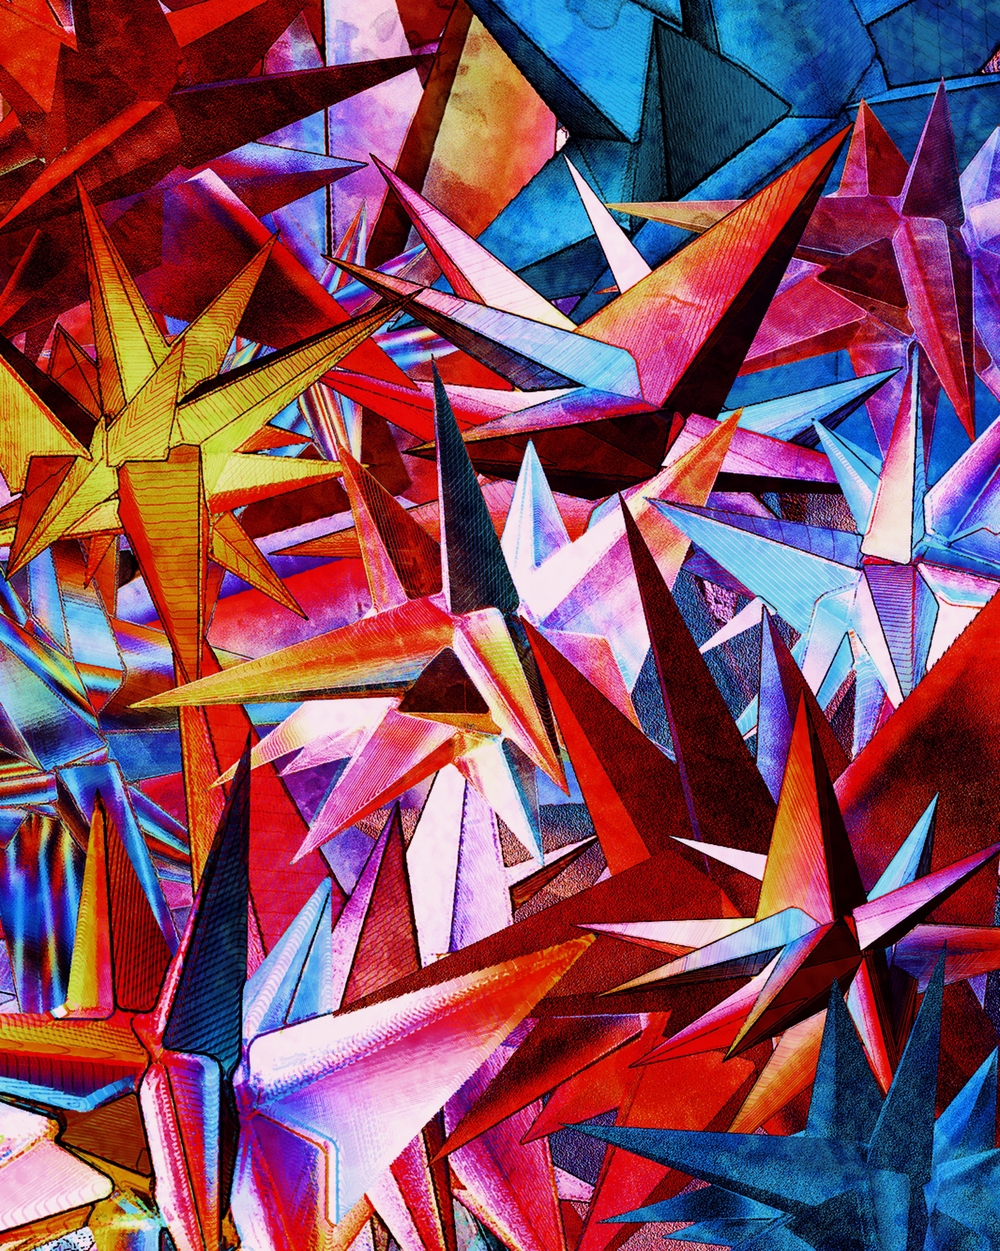 Red and Blue Landscapes of Stellated Polyhedrons with Cells | Rare Digital Artwork | MakersPlace